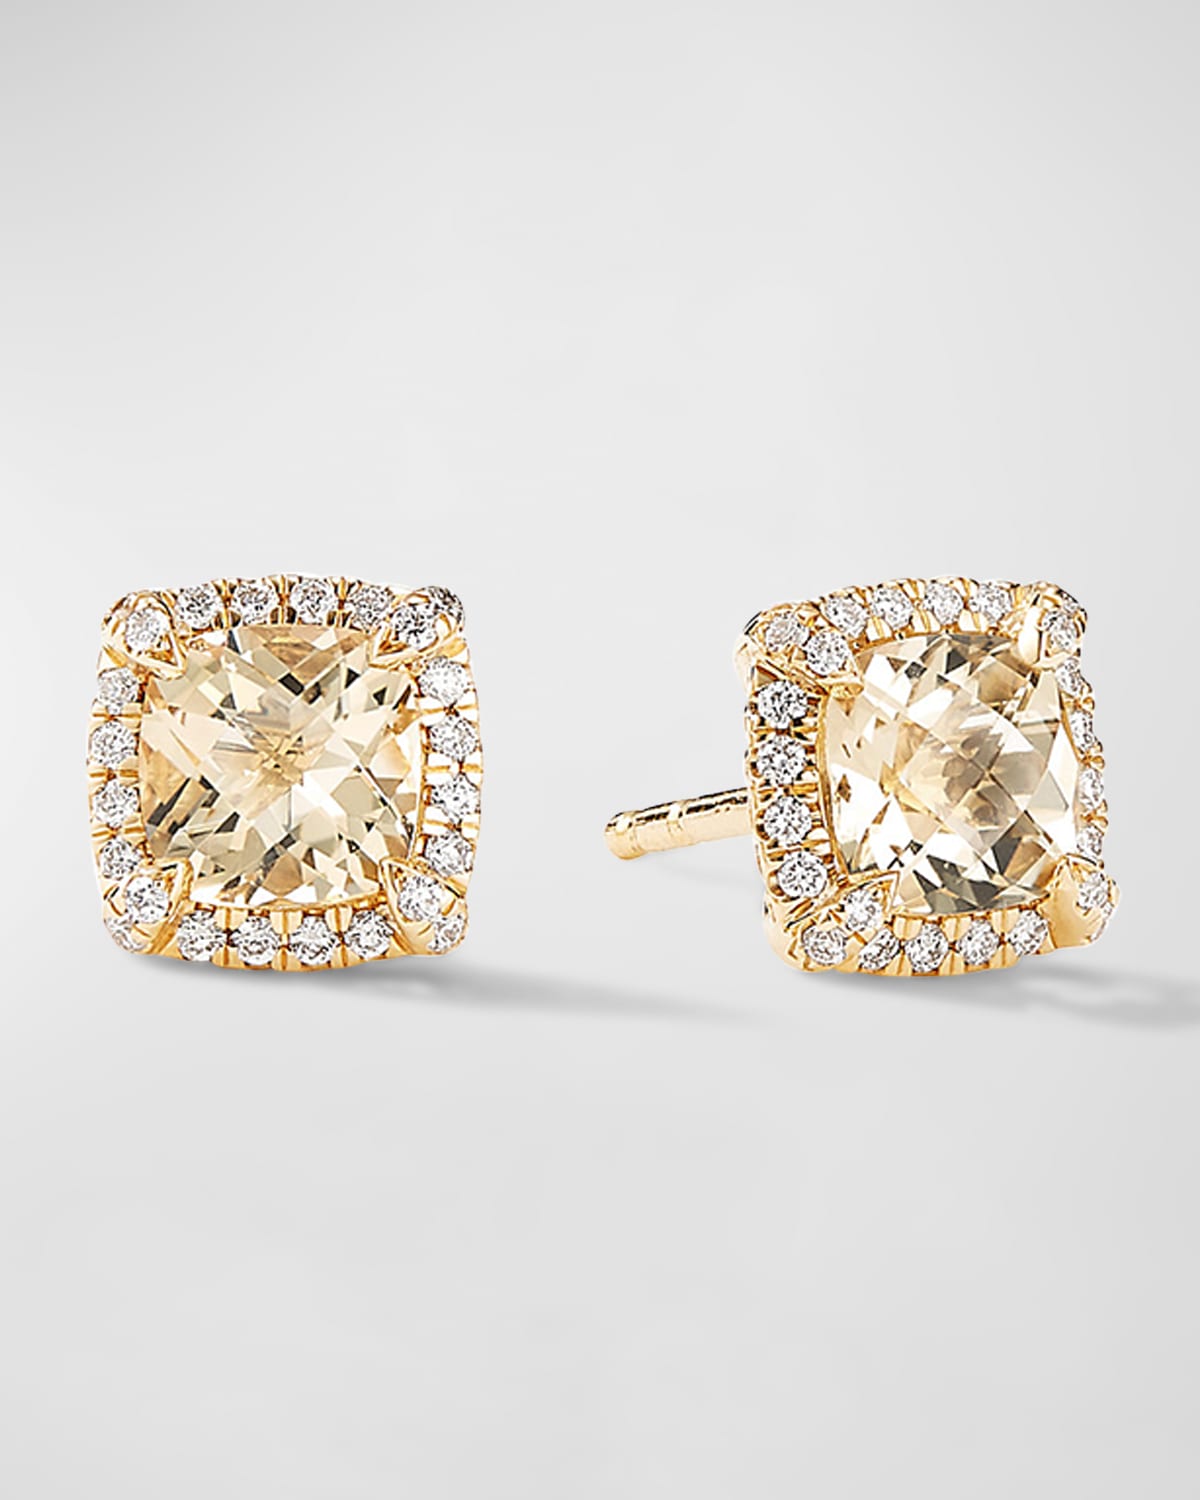 Petite Chatelaine Stud Earrings with Citrine and Diamonds in 18K Gold, 7mm